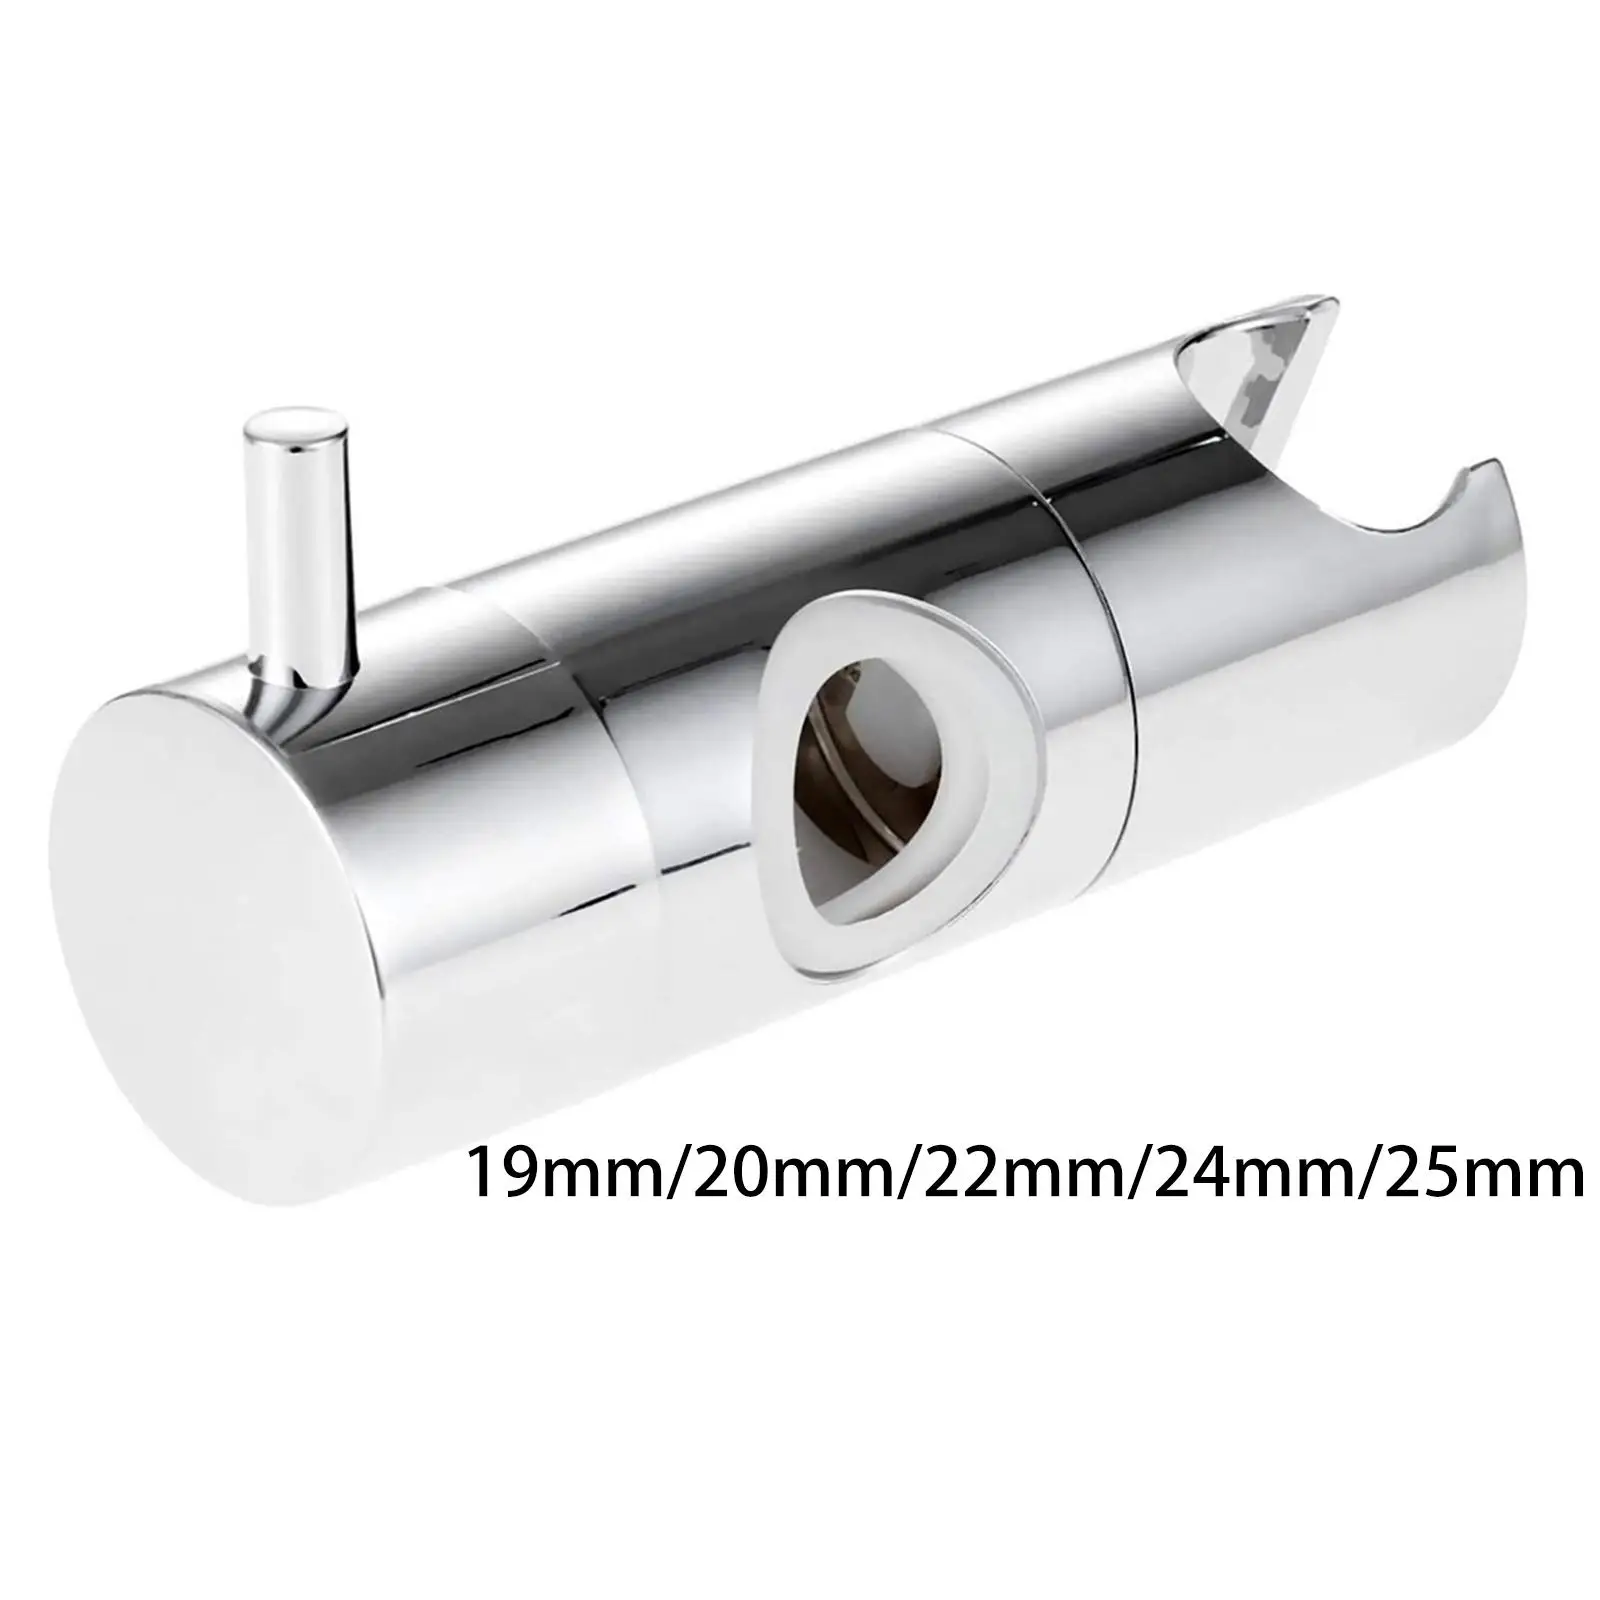 Universal Shower Head Holders Silde Bar Rotary Non Drilling for Fitments